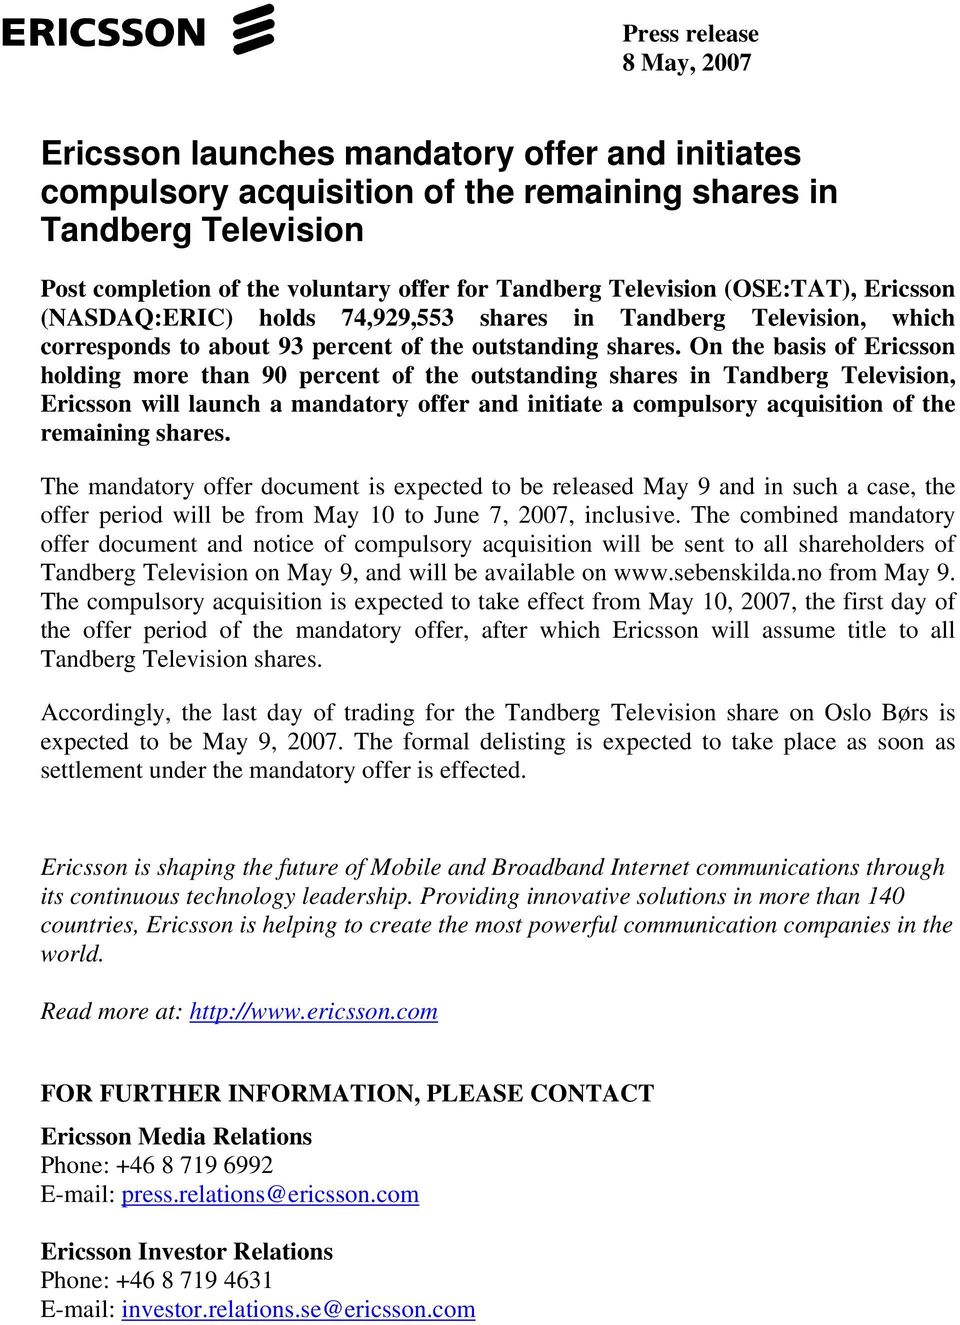 On the basis of Ericsson holding more than 90 percent of the outstanding shares in Tandberg Television, Ericsson will launch a mandatory offer and initiate a compulsory acquisition of the remaining